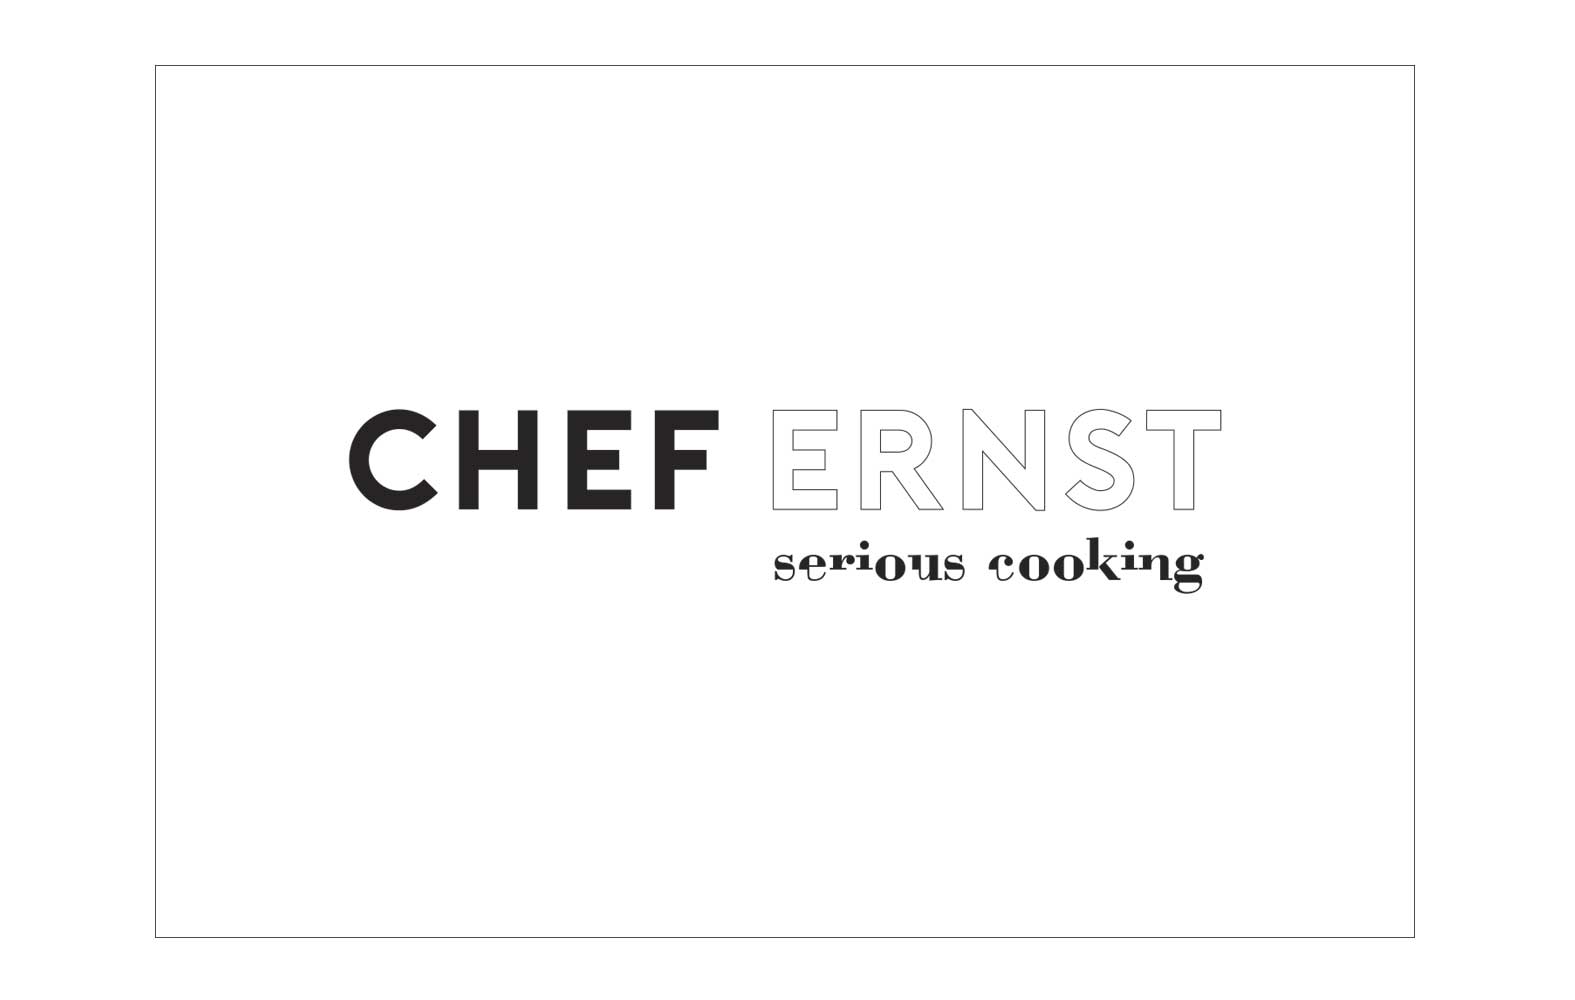 Chef-Ernst-Serious-Cooking-logo